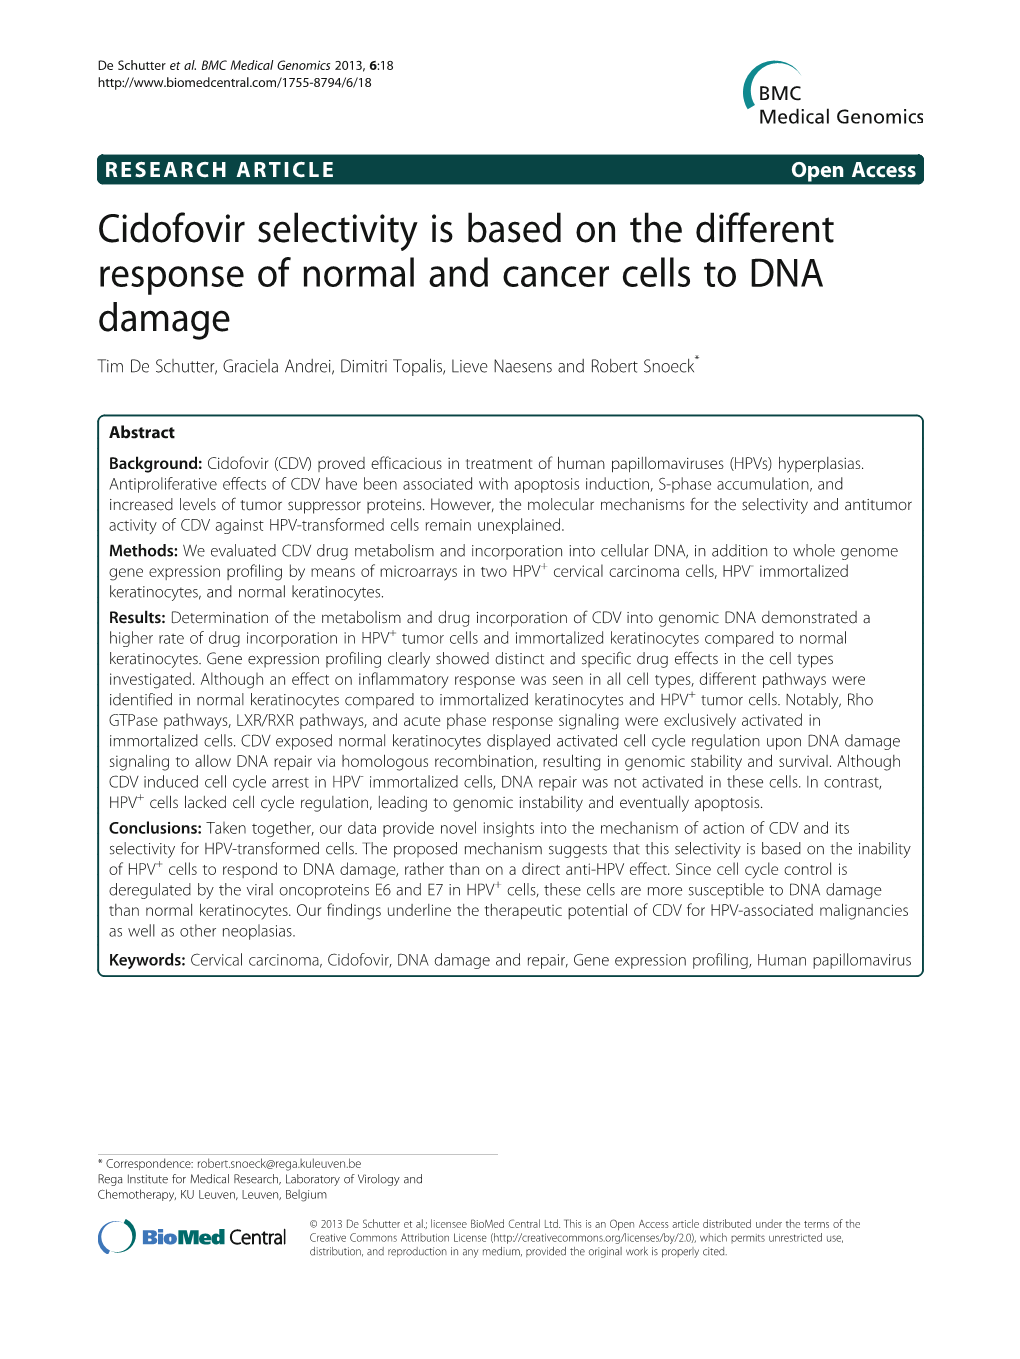 Cidofovir Selectivity Is Based on the Different Response of Normal And